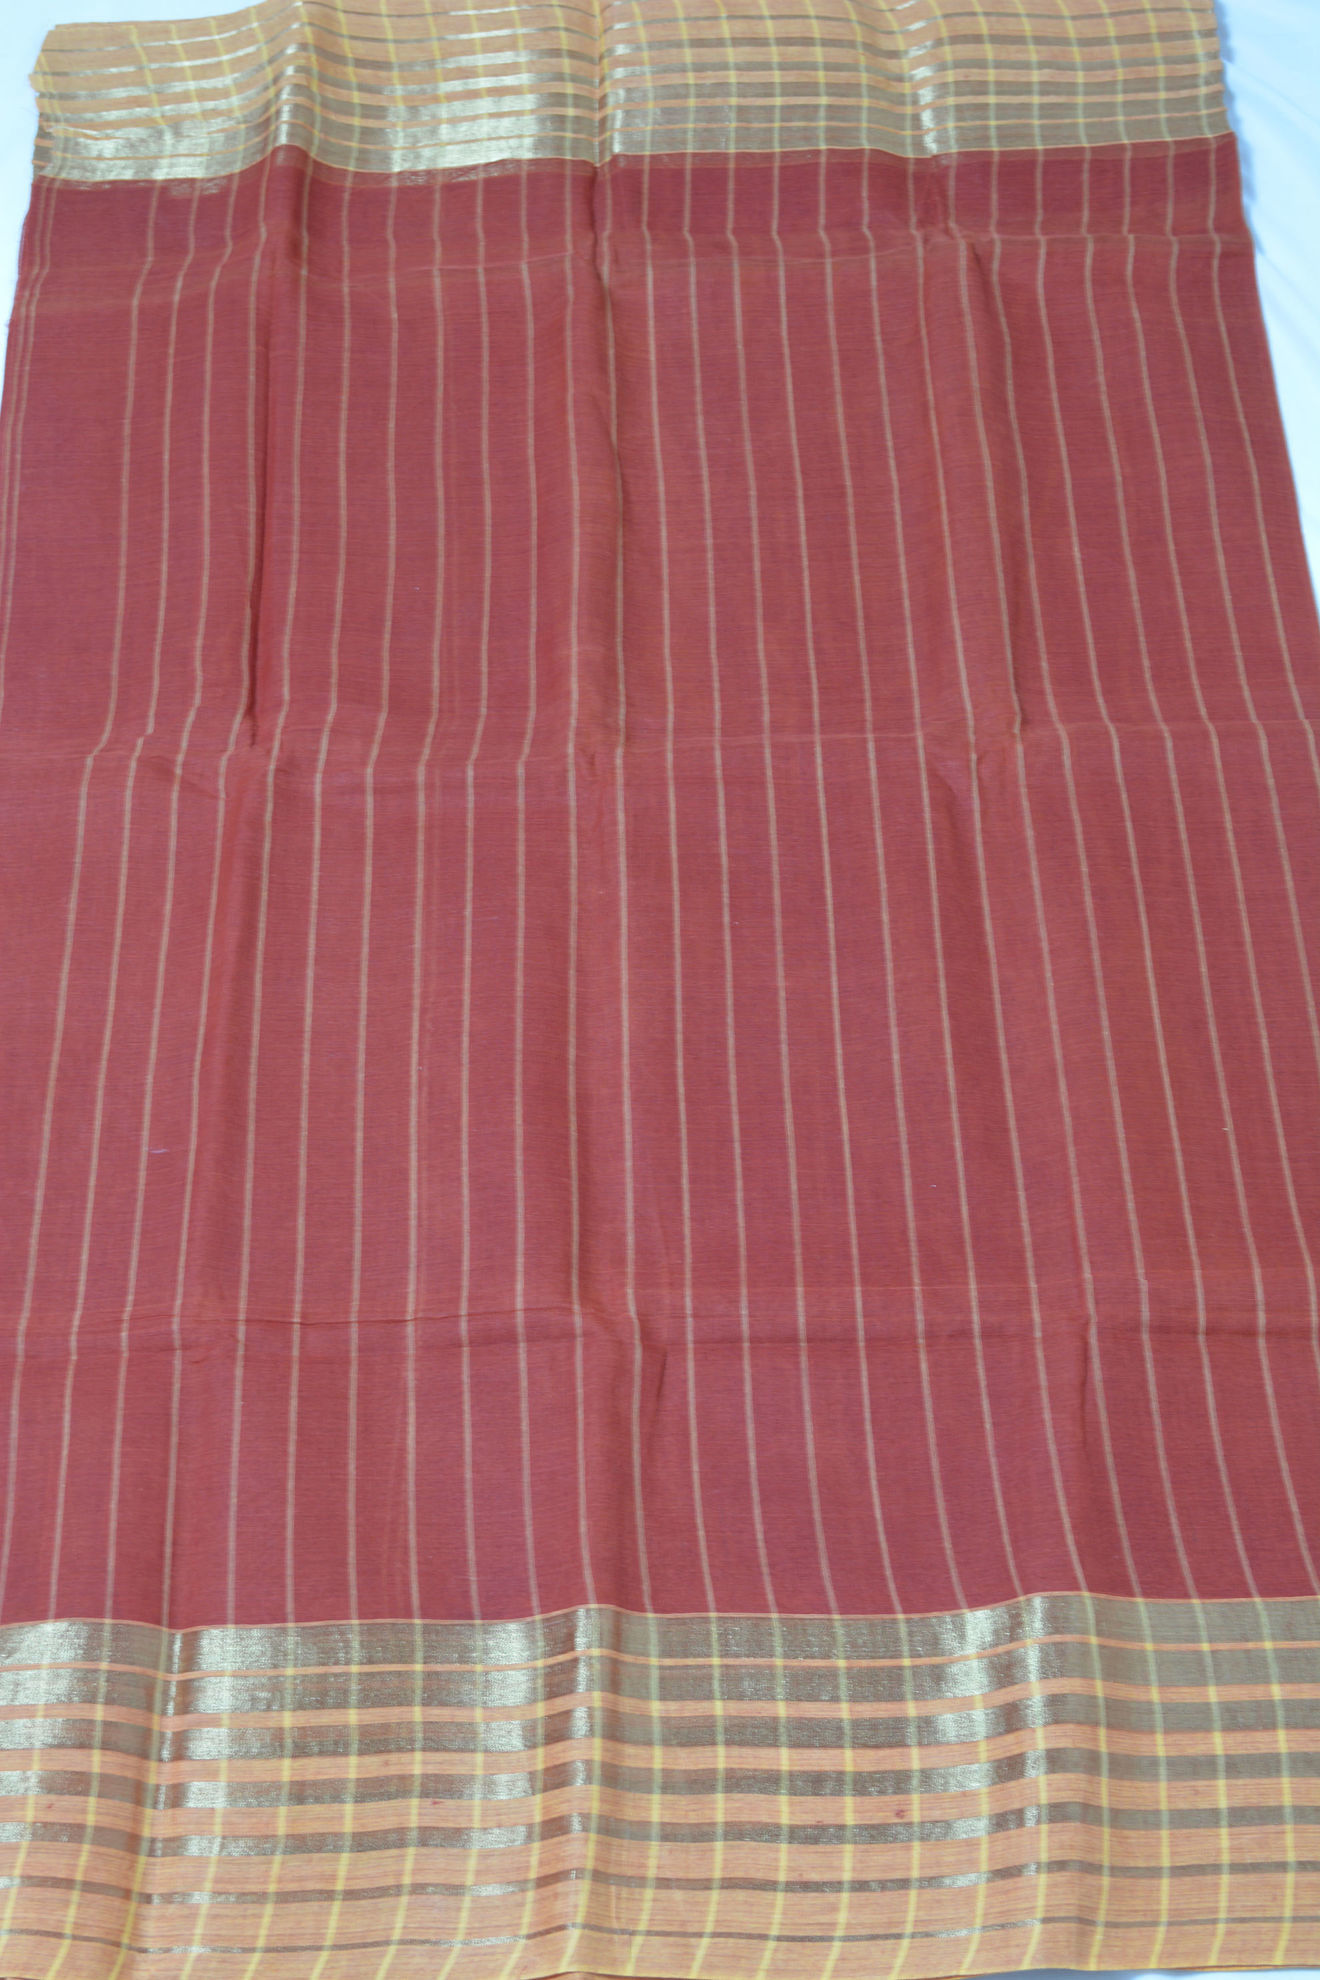 Tvis and Bliss. Brick Red Bengal Cotton Saree with Zari Border